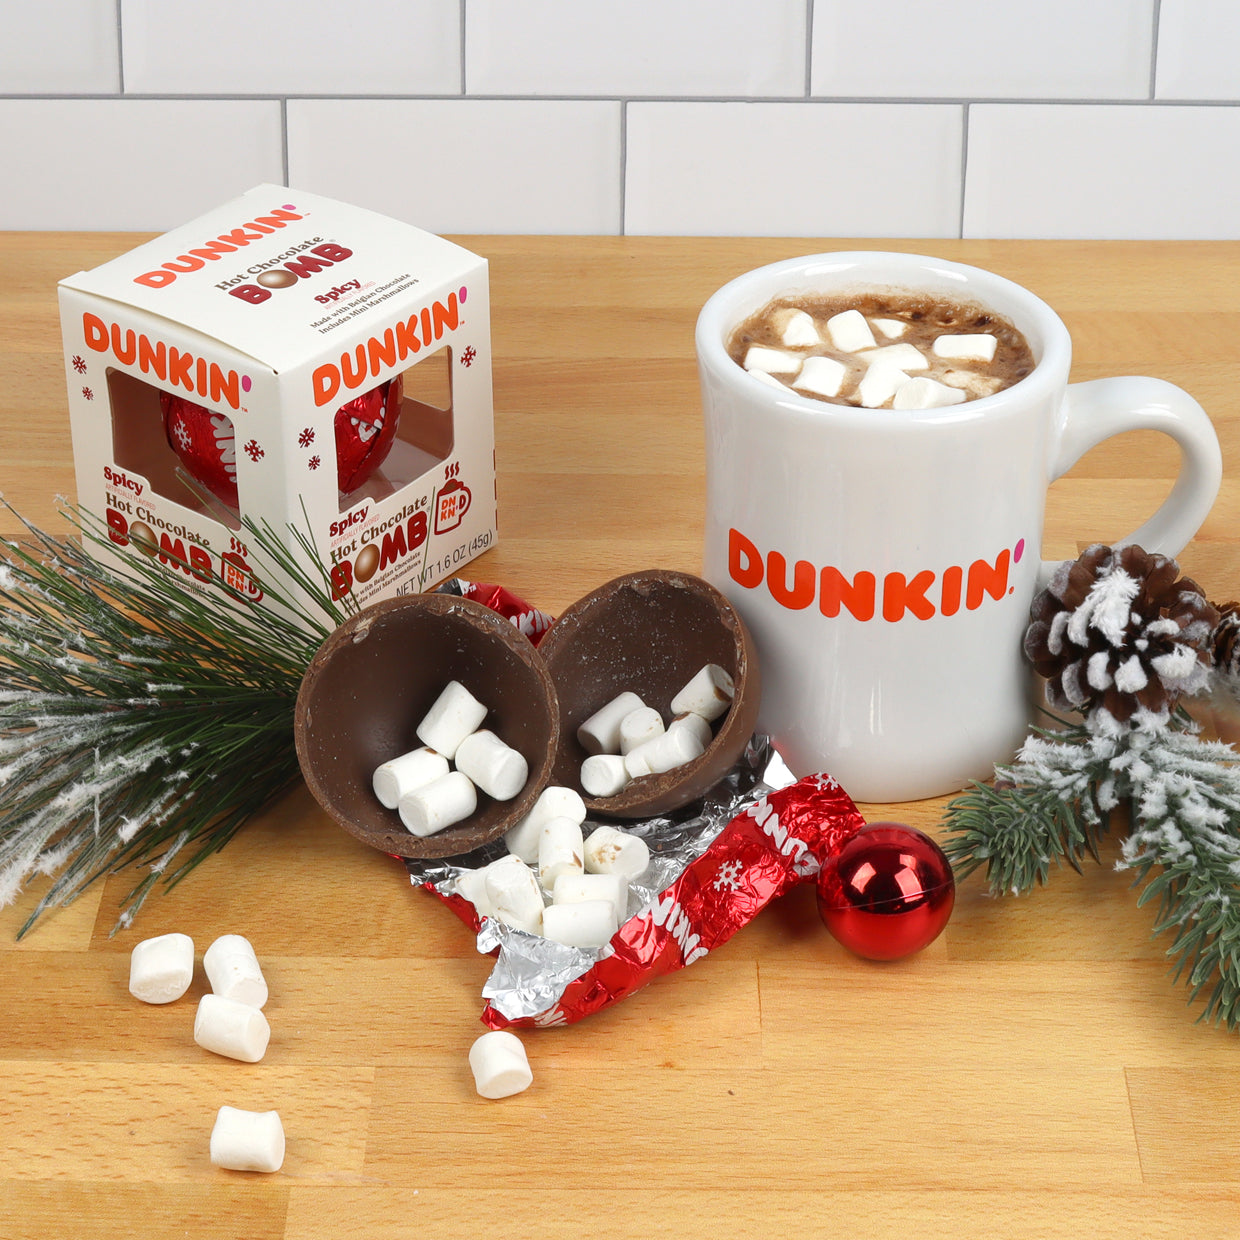 white christmas themed box with red foil with Dunkin' logo wrapped hot chocolate bomb, white Dunkin' mug with hot chocolate and mini marshmallows, and broken hot chocolate bomb with mini marshmallows